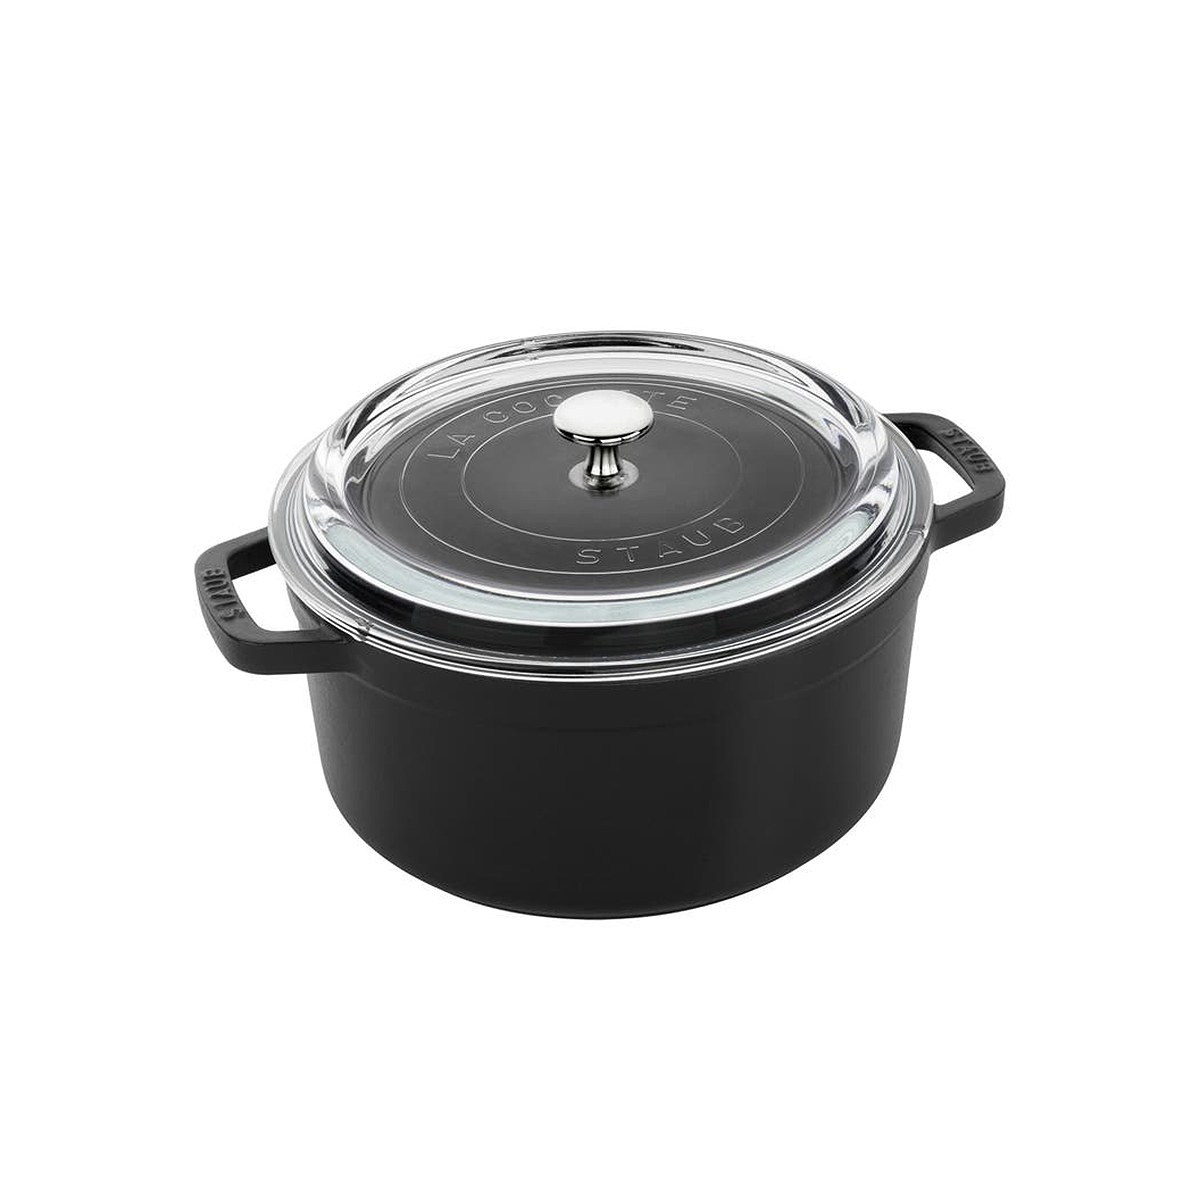 nordstrom-half-yearly-sale-staub-cocette